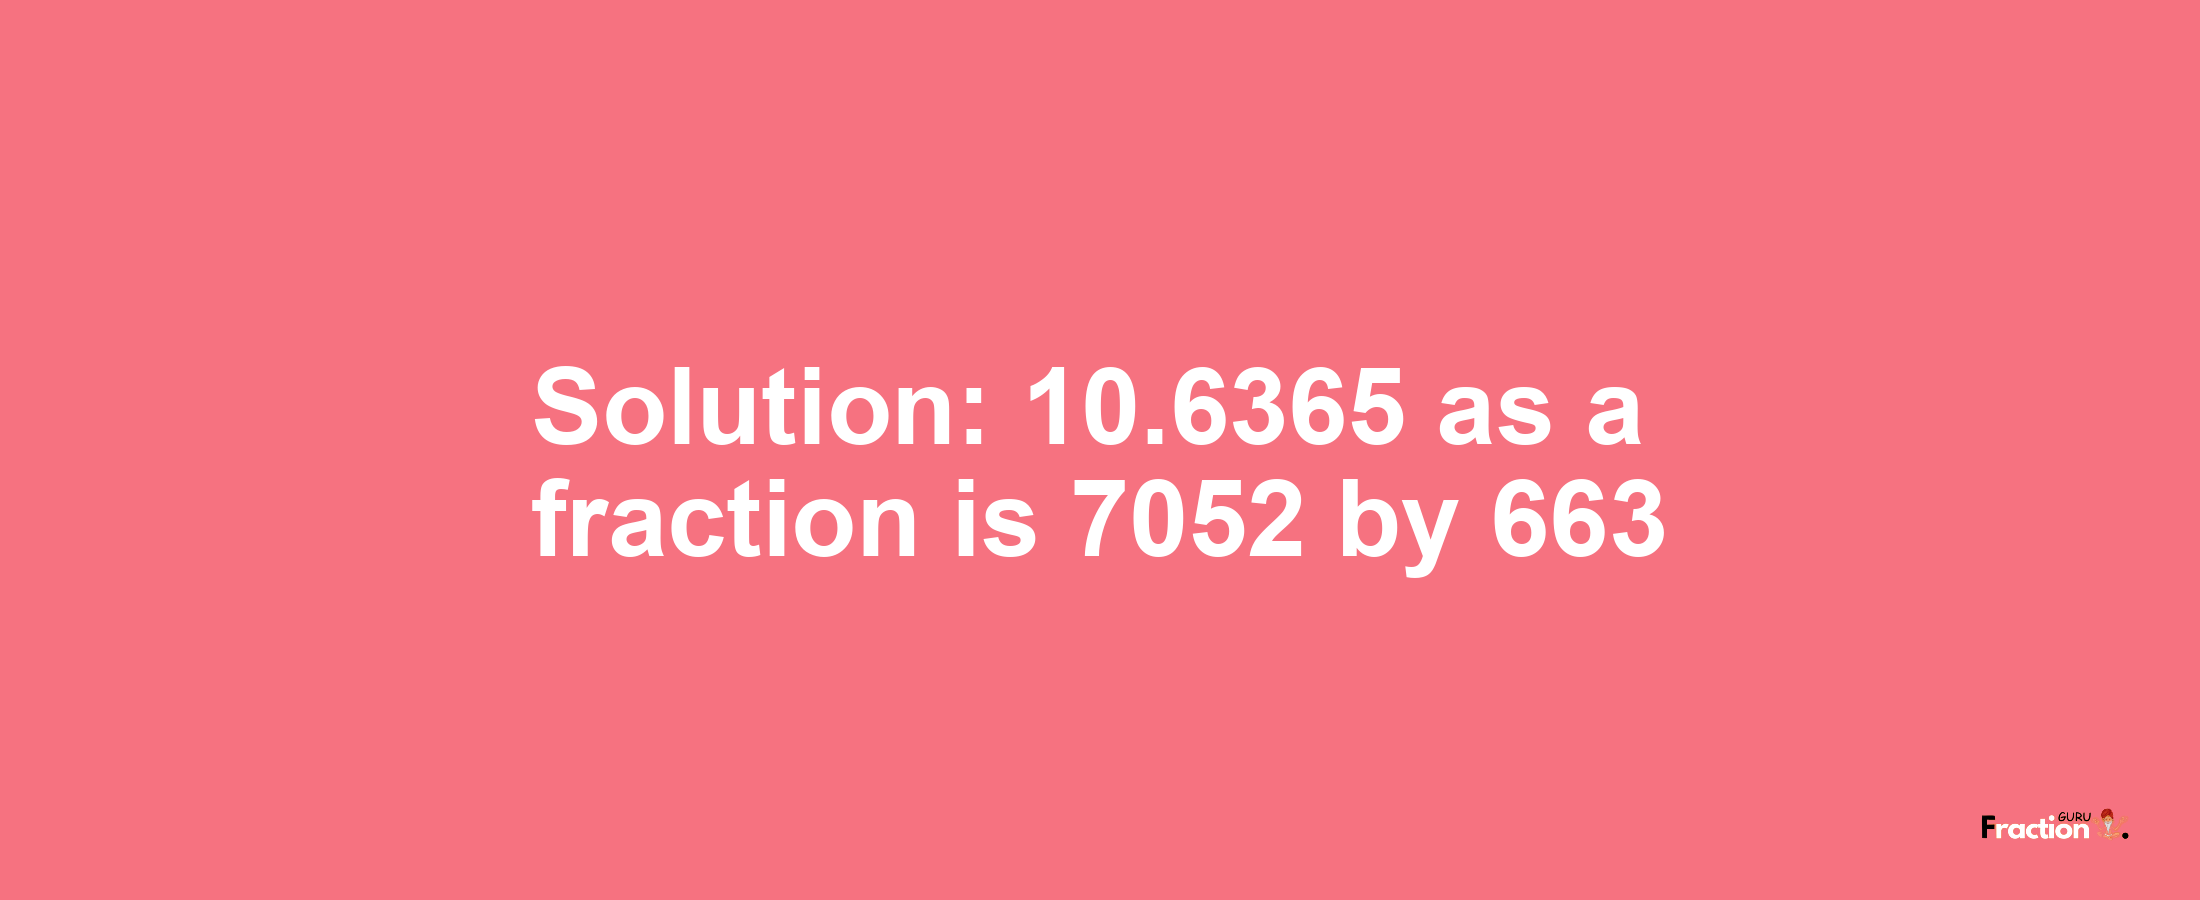 Solution:10.6365 as a fraction is 7052/663